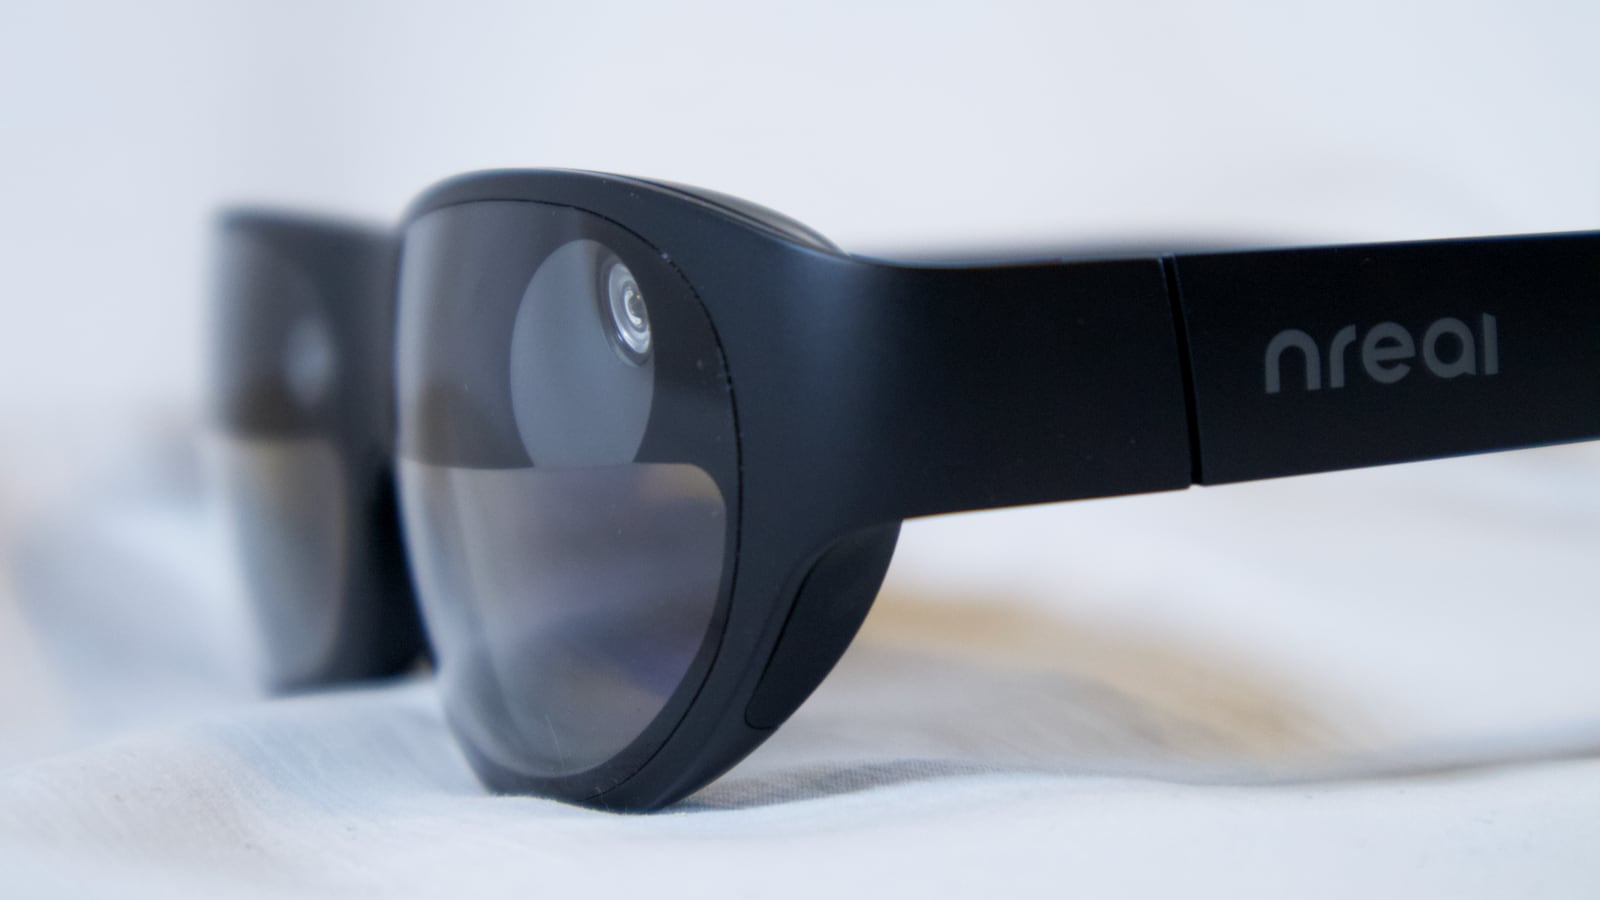 Nreal Light AR Smart Glasses Review: Close, But Not Quite There